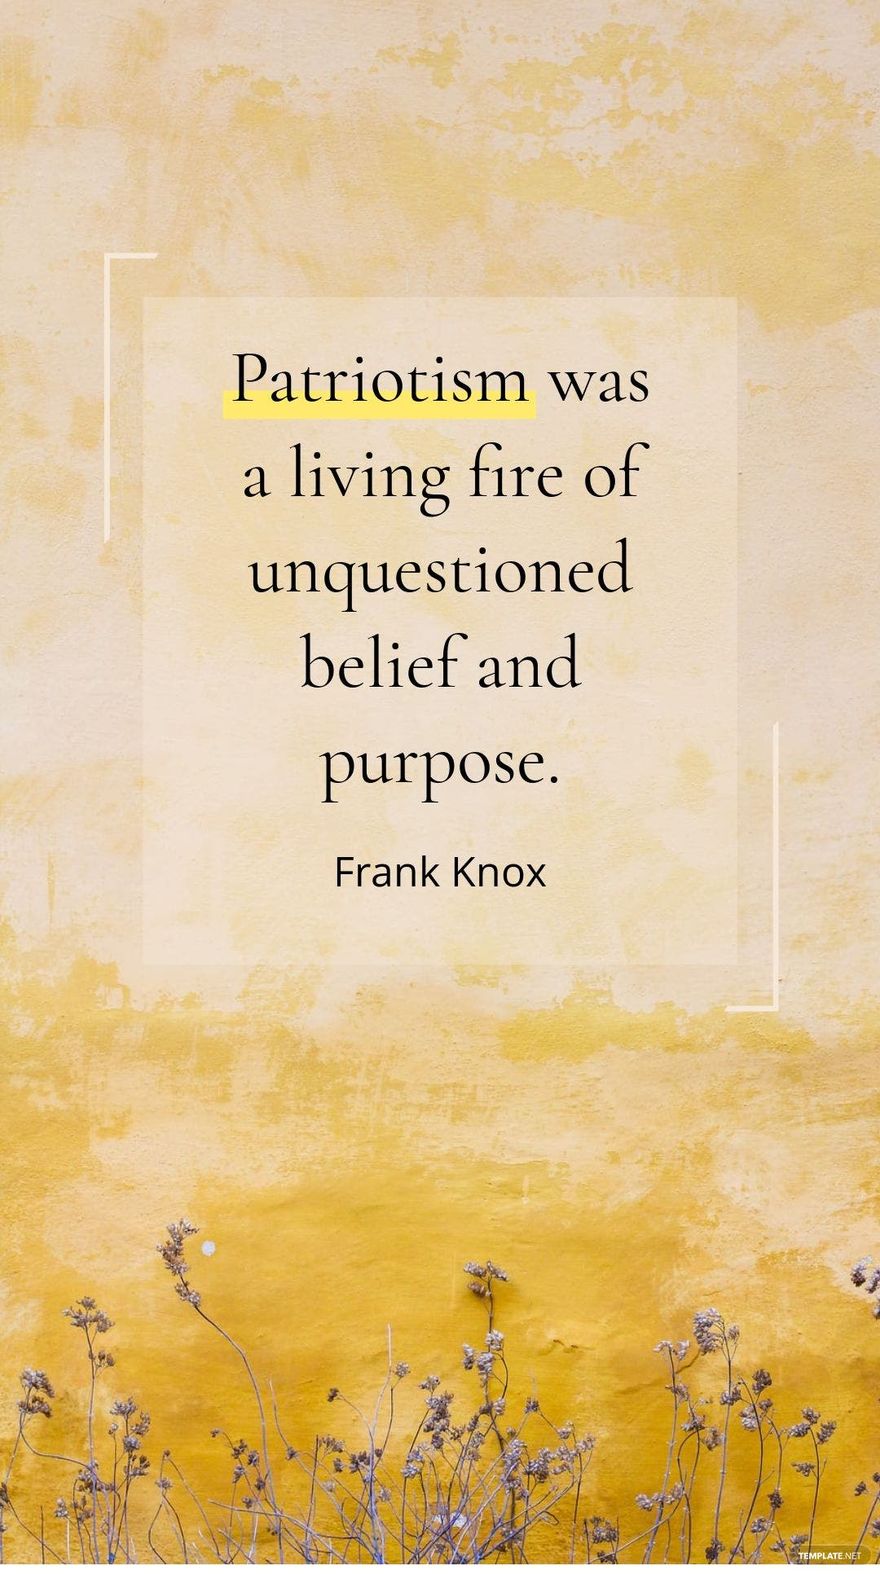 Frank Knox - Patriotism was a living fire of unquestioned belief and purpose. in JPG